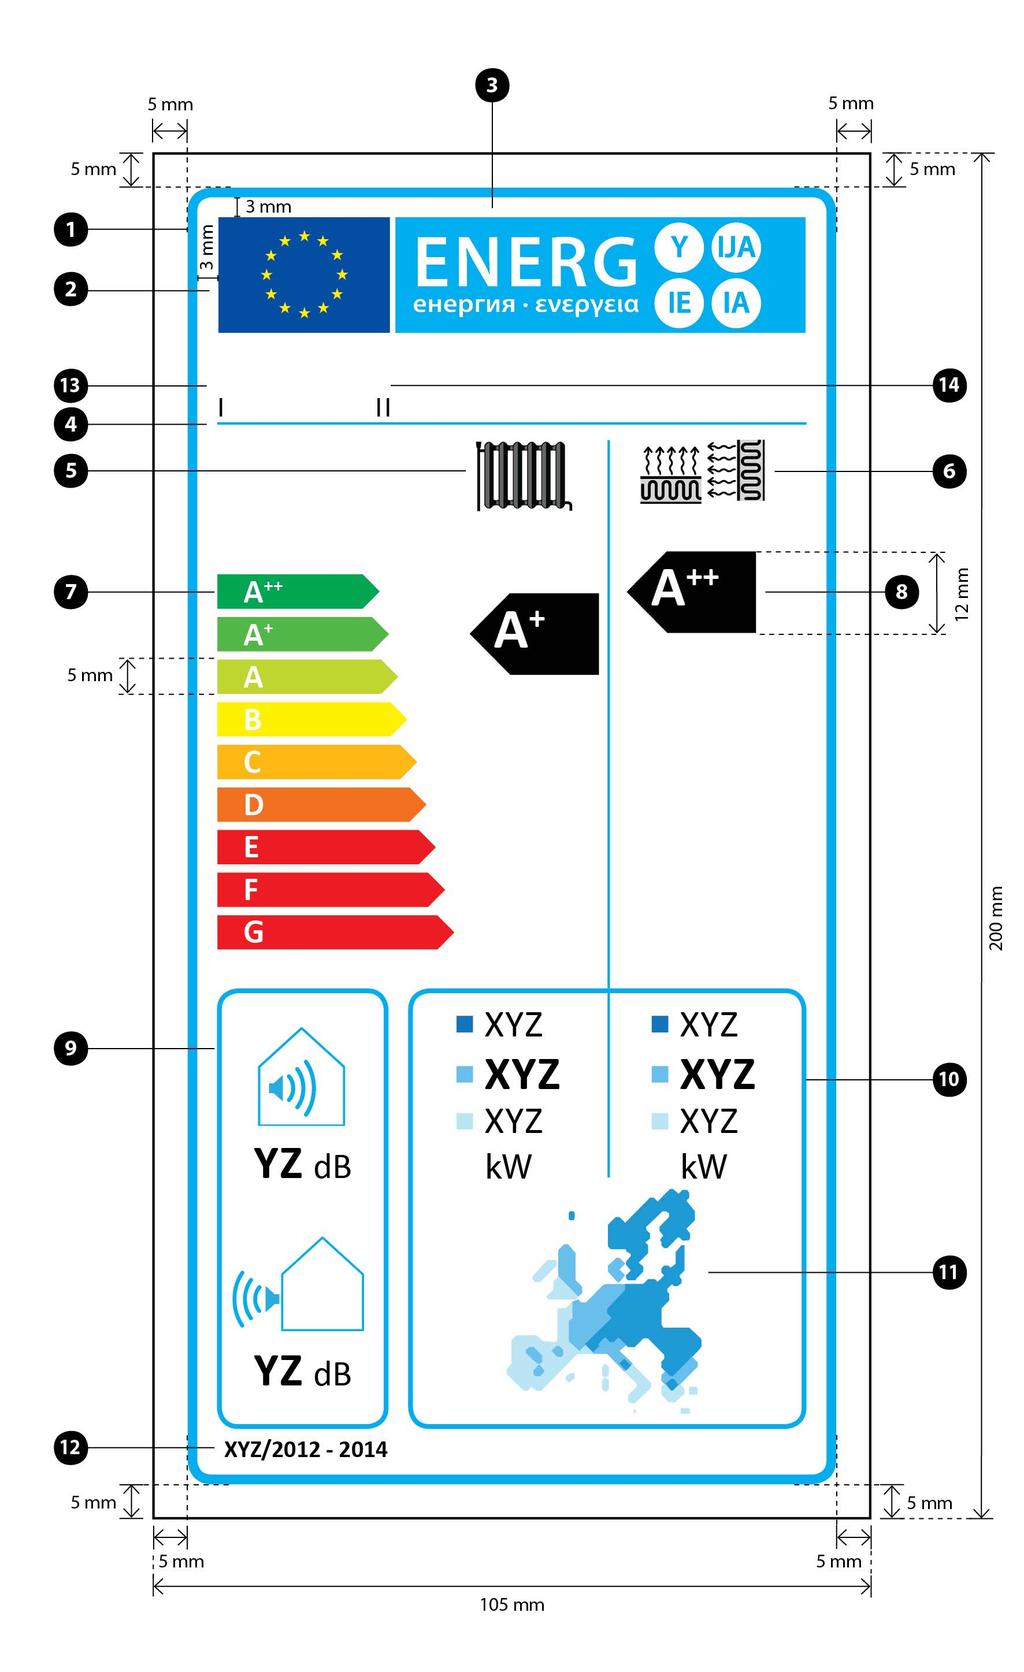 7. The design of the label for heat pump